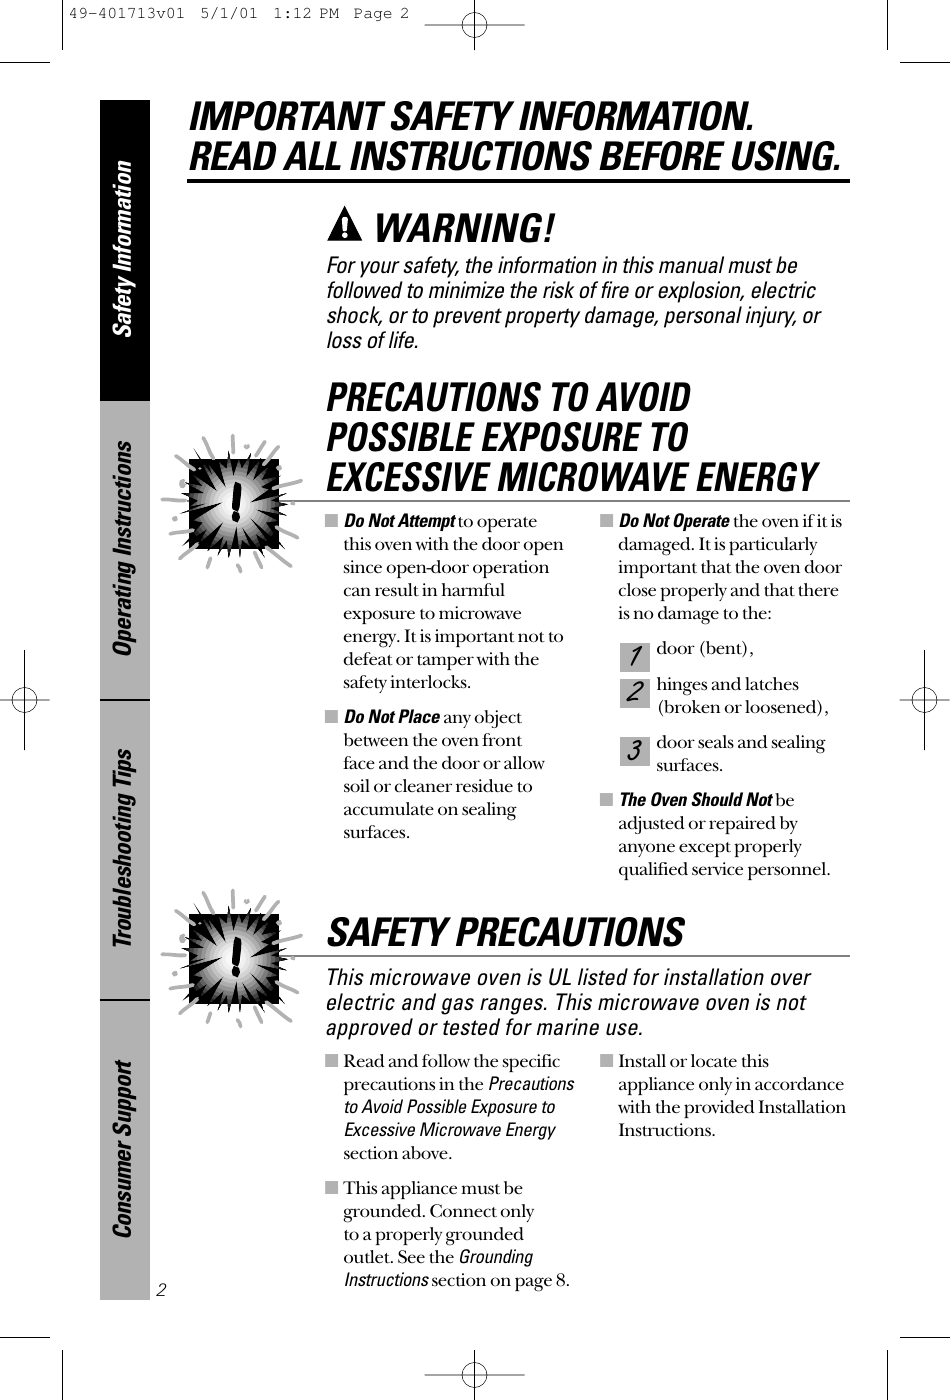 ■Read and follow the specificprecautions in the Precautionsto Avoid Possible Exposure toExcessive Microwave Energysection above.■This appliance must begrounded. Connect only to a properly grounded outlet. See the GroundingInstructionssection on page 8.■Install or locate this appliance only in accordancewith the provided InstallationInstructions.■Do Not Attemptto operate this oven with the door opensince open-door operationcan result in harmfulexposure to microwaveenergy. It is important not todefeat or tamper with thesafety interlocks.■Do Not Place any objectbetween the oven front face and the door or allowsoil or cleaner residue toaccumulate on sealing surfaces.■Do Not Operate the oven if it isdamaged. It is particularlyimportant that the oven doorclose properly and that thereis no damage to the:door (bent),hinges and latches (broken or loosened),door seals and sealingsurfaces.■The Oven Should Not beadjusted or repaired by anyone except properlyqualified service personnel.321PRECAUTIONS TO AVOID POSSIBLE EXPOSURE TO EXCESSIVE MICROWAVE ENERGYSafety InformationOperating InstructionsTroubleshooting TipsConsumer SupportIMPORTANT SAFETY INFORMATION.READ ALL INSTRUCTIONS BEFORE USING.2For your safety, the information in this manual must be followed to minimize the risk of fire or explosion, electricshock, or to prevent property damage, personal injury, or loss of life.WARNING!This microwave oven is UL listed for installation overelectric and gas ranges. This microwave oven is notapproved or tested for marine use.SAFETY PRECAUTIONS49-401713v01  5/1/01  1:12 PM  Page 2